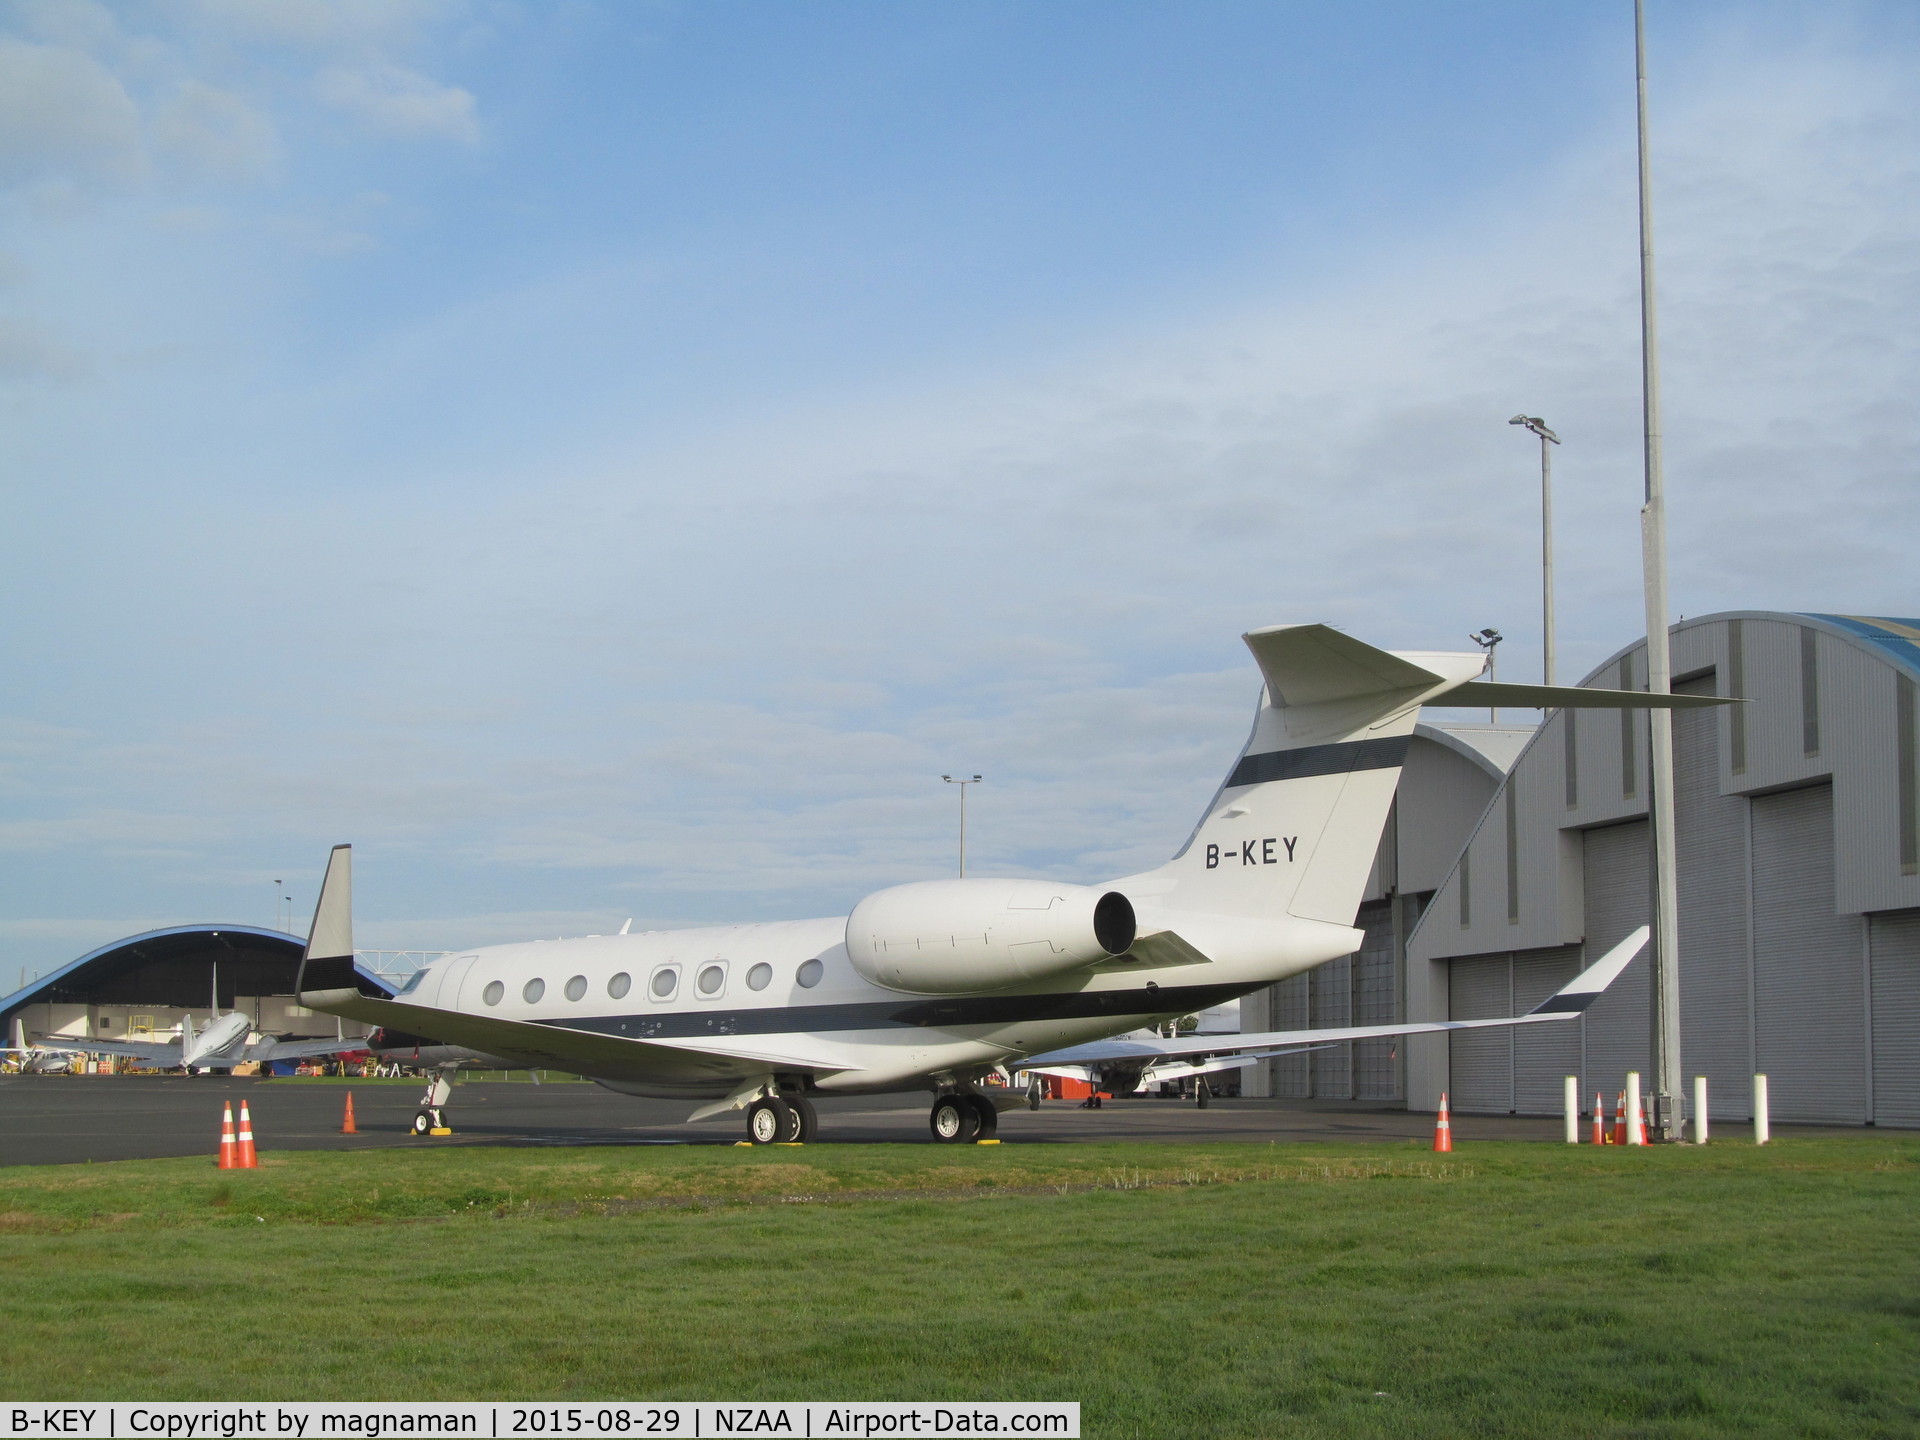 B-KEY, 2014 Gulfstream Aerospace G650 (G-VI) C/N 6098, Replacement perhaps for B-KID - on first visit to NZ